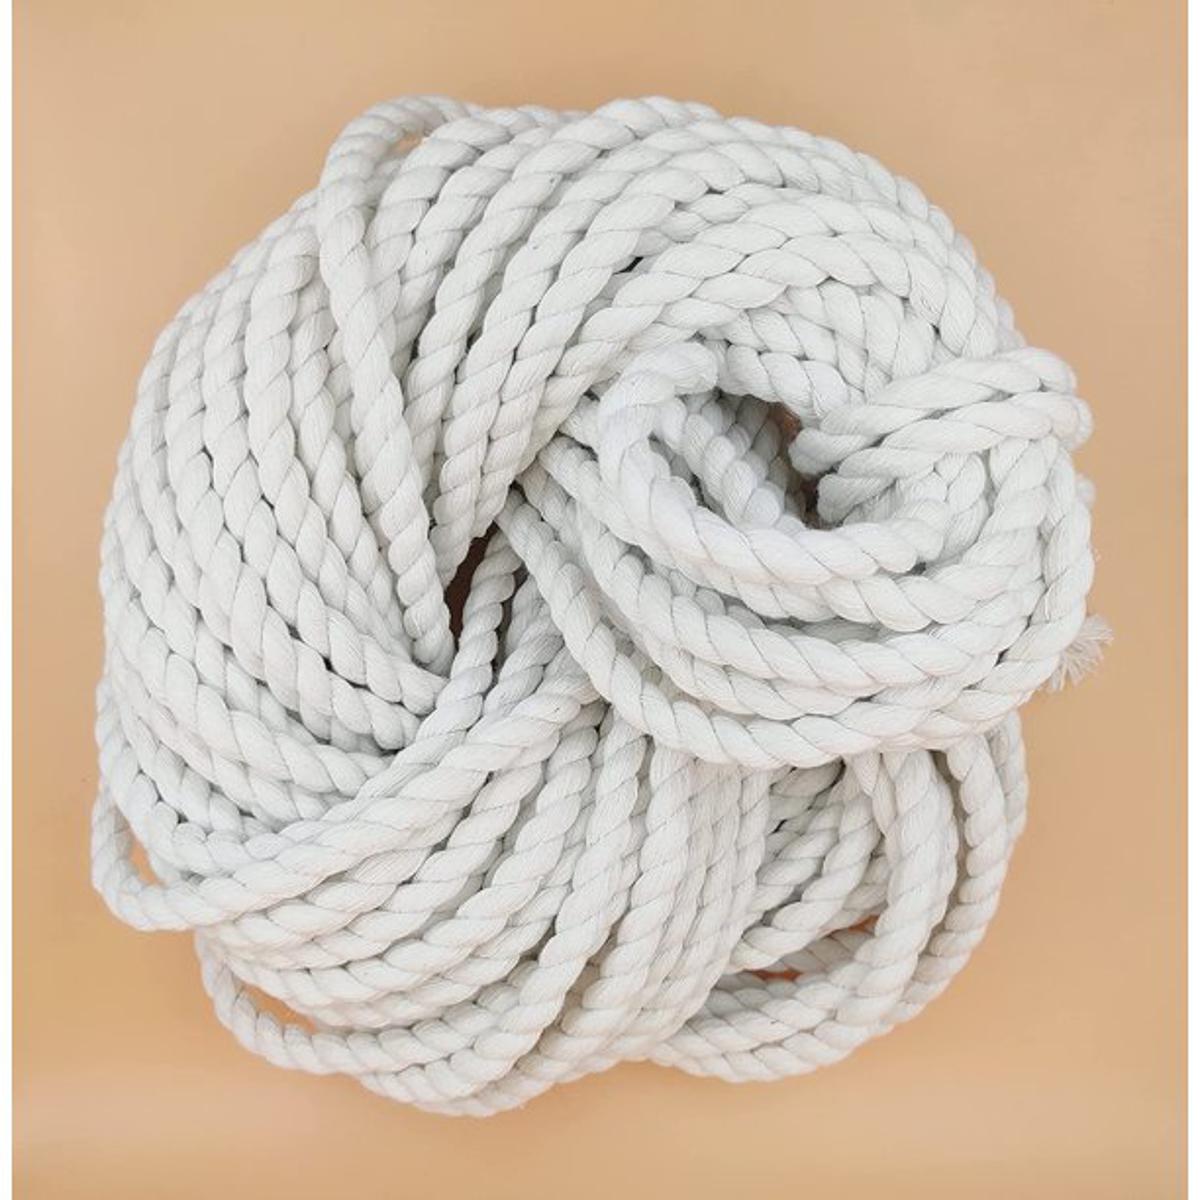 cotton rope heavy duty for multi purposes white rope cotton